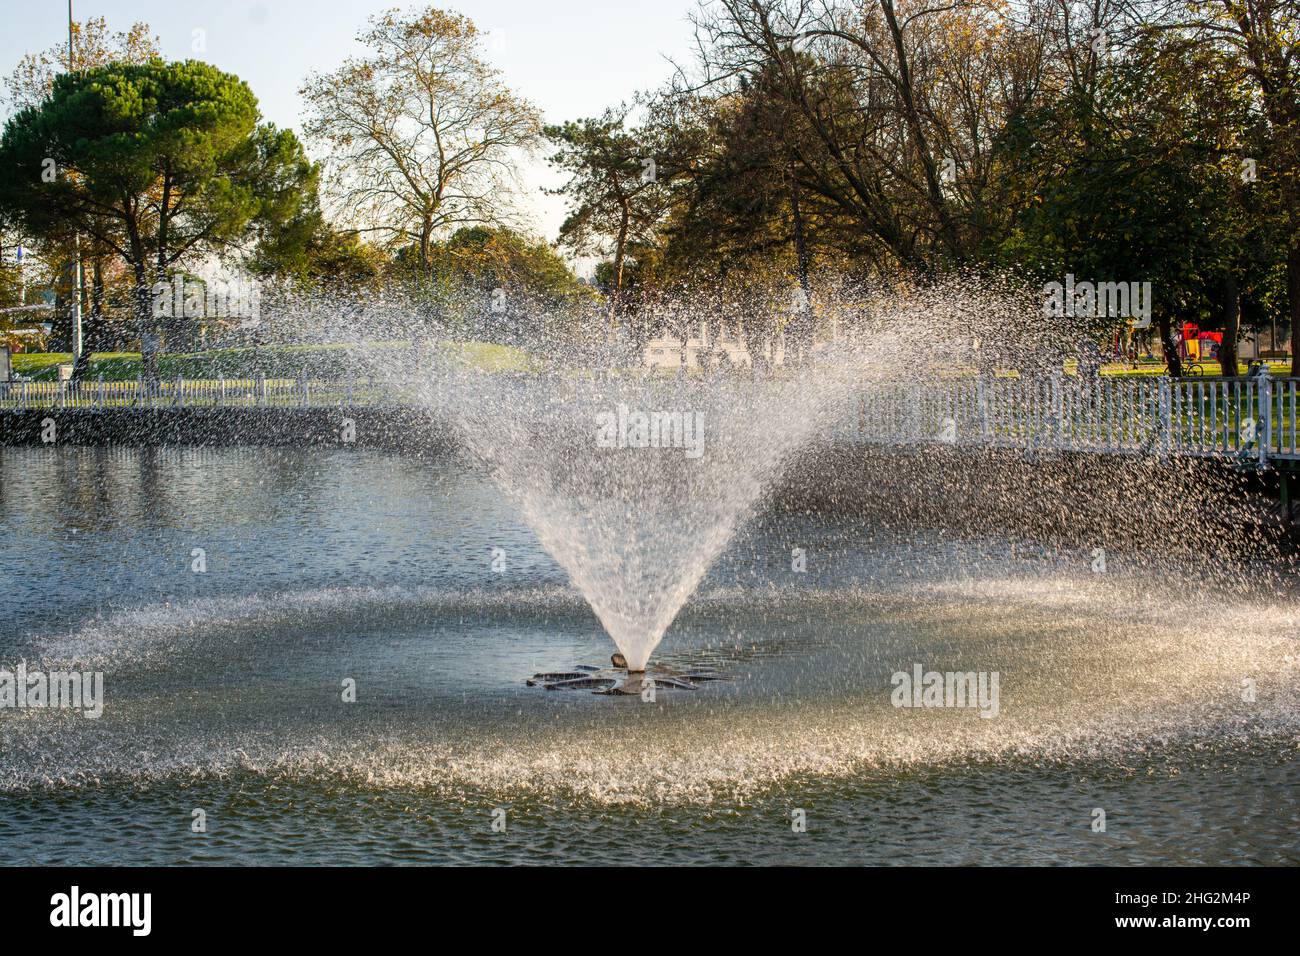 The fountain spouting water from a vertical in a  pool Stock Photo